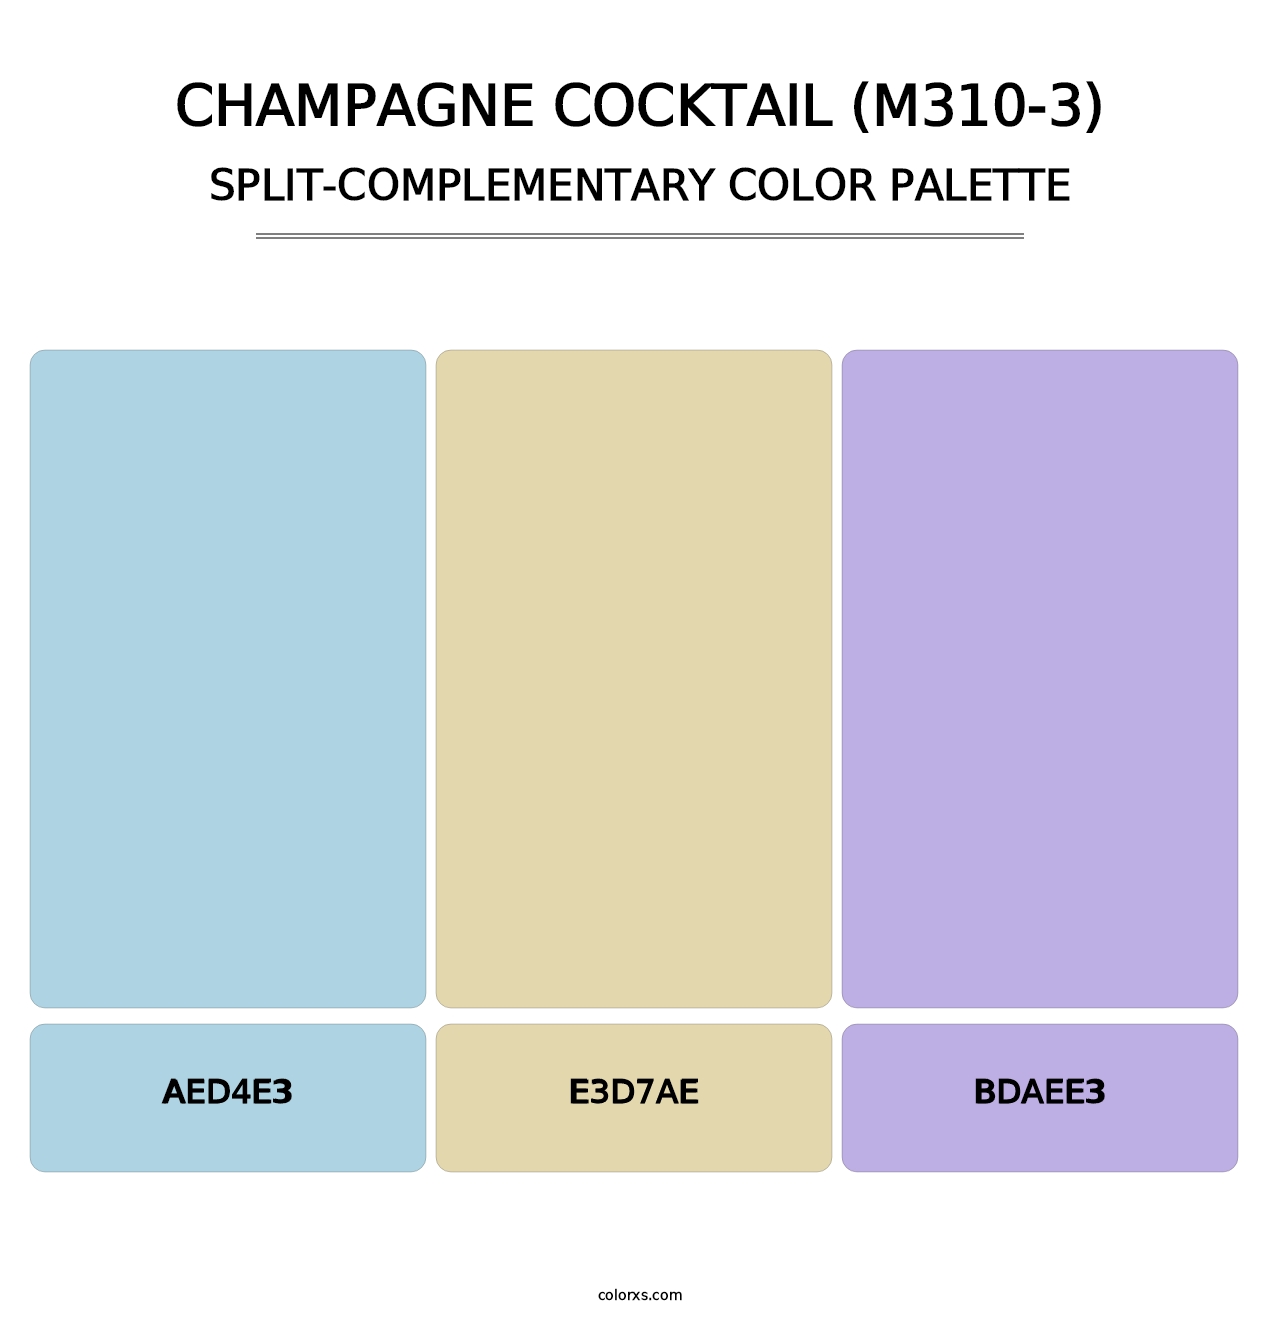 Champagne Cocktail (M310-3) - Split-Complementary Color Palette